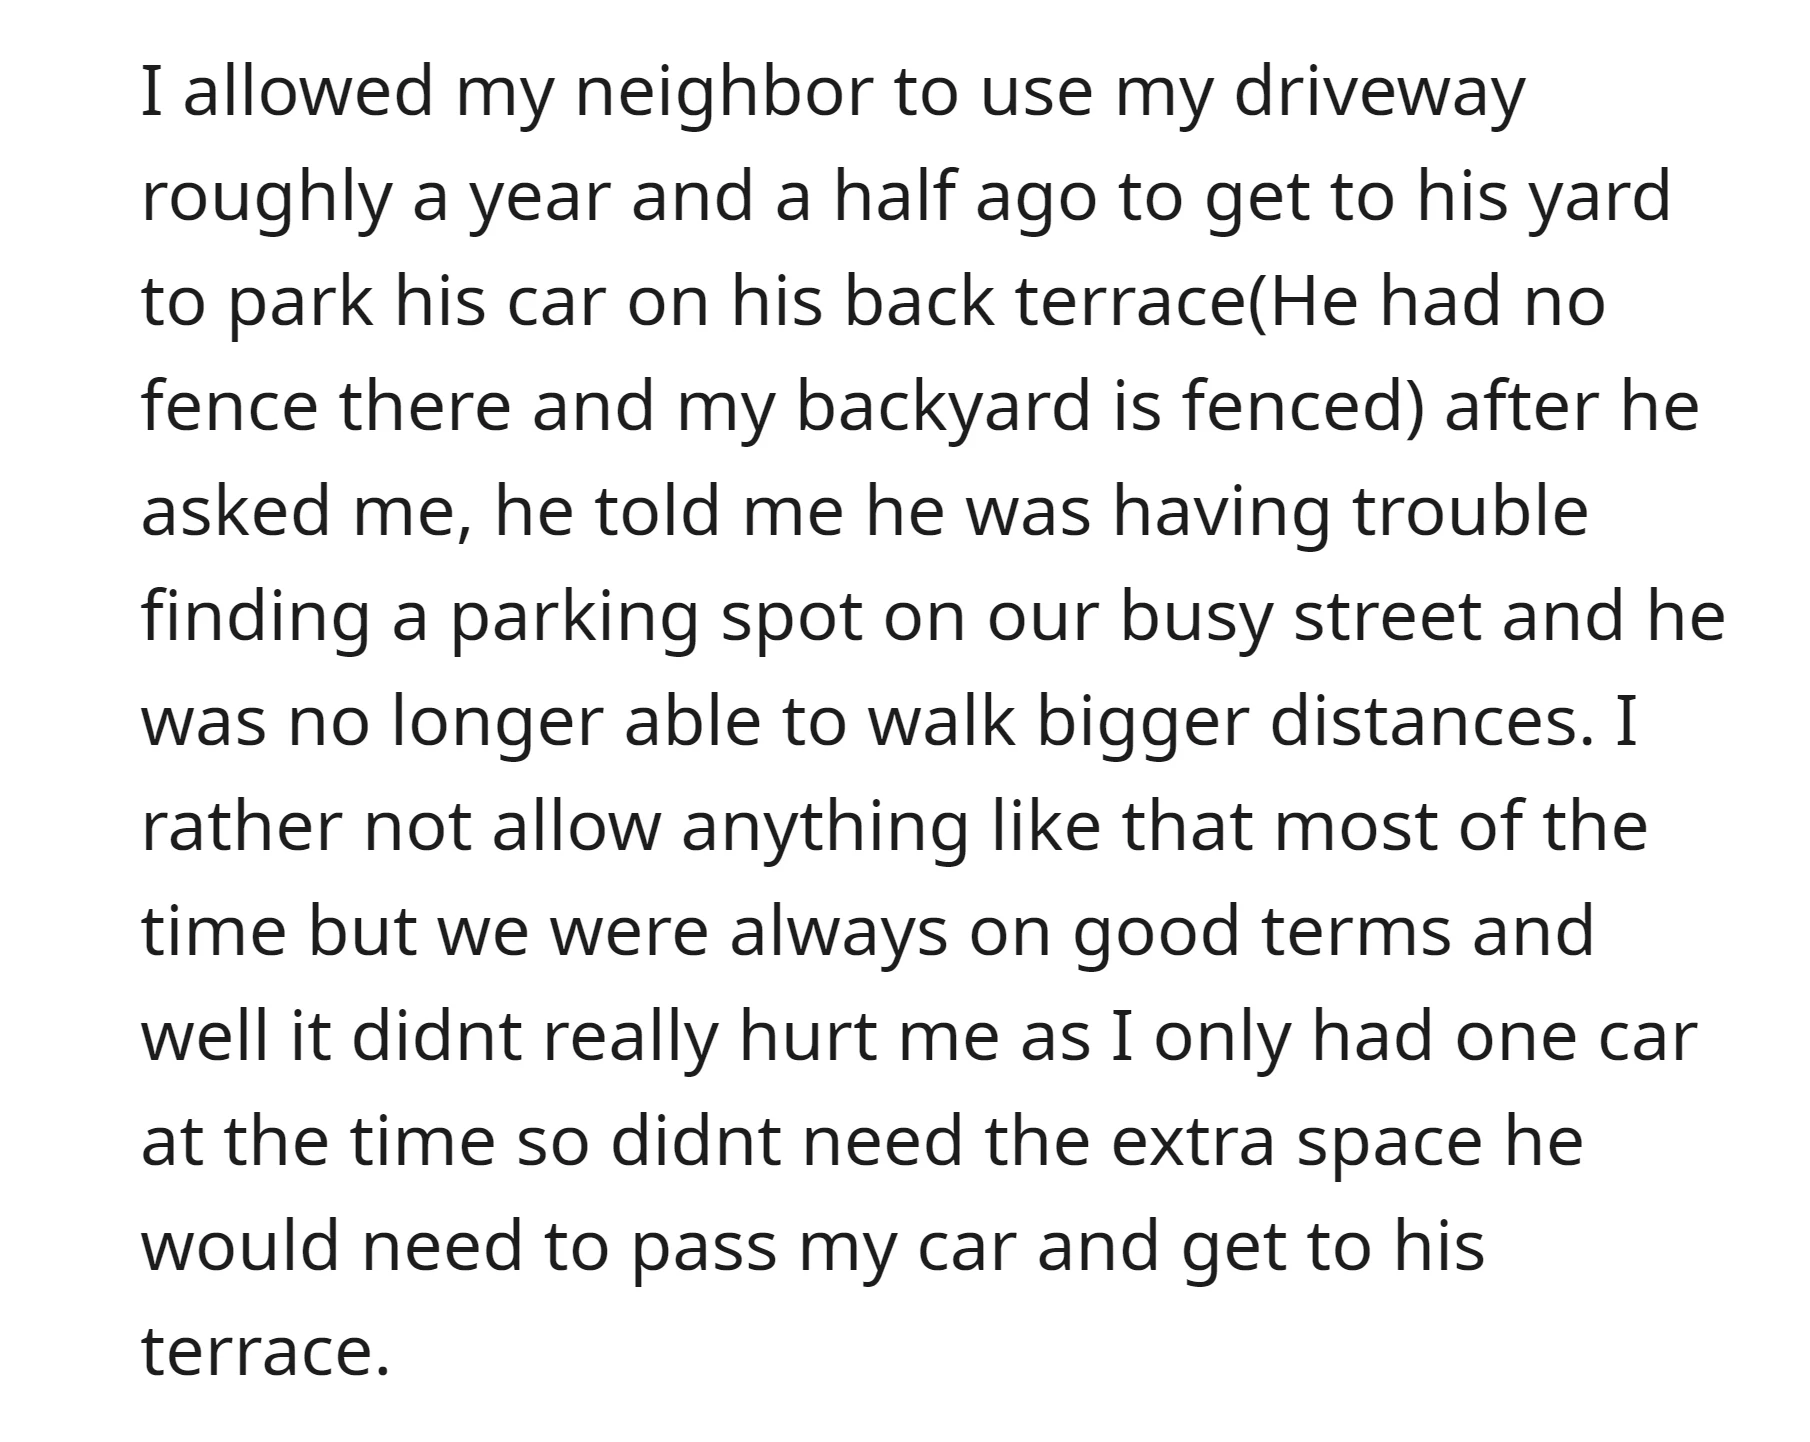 OP let their neighbor to use their driveway about a year and a half ago